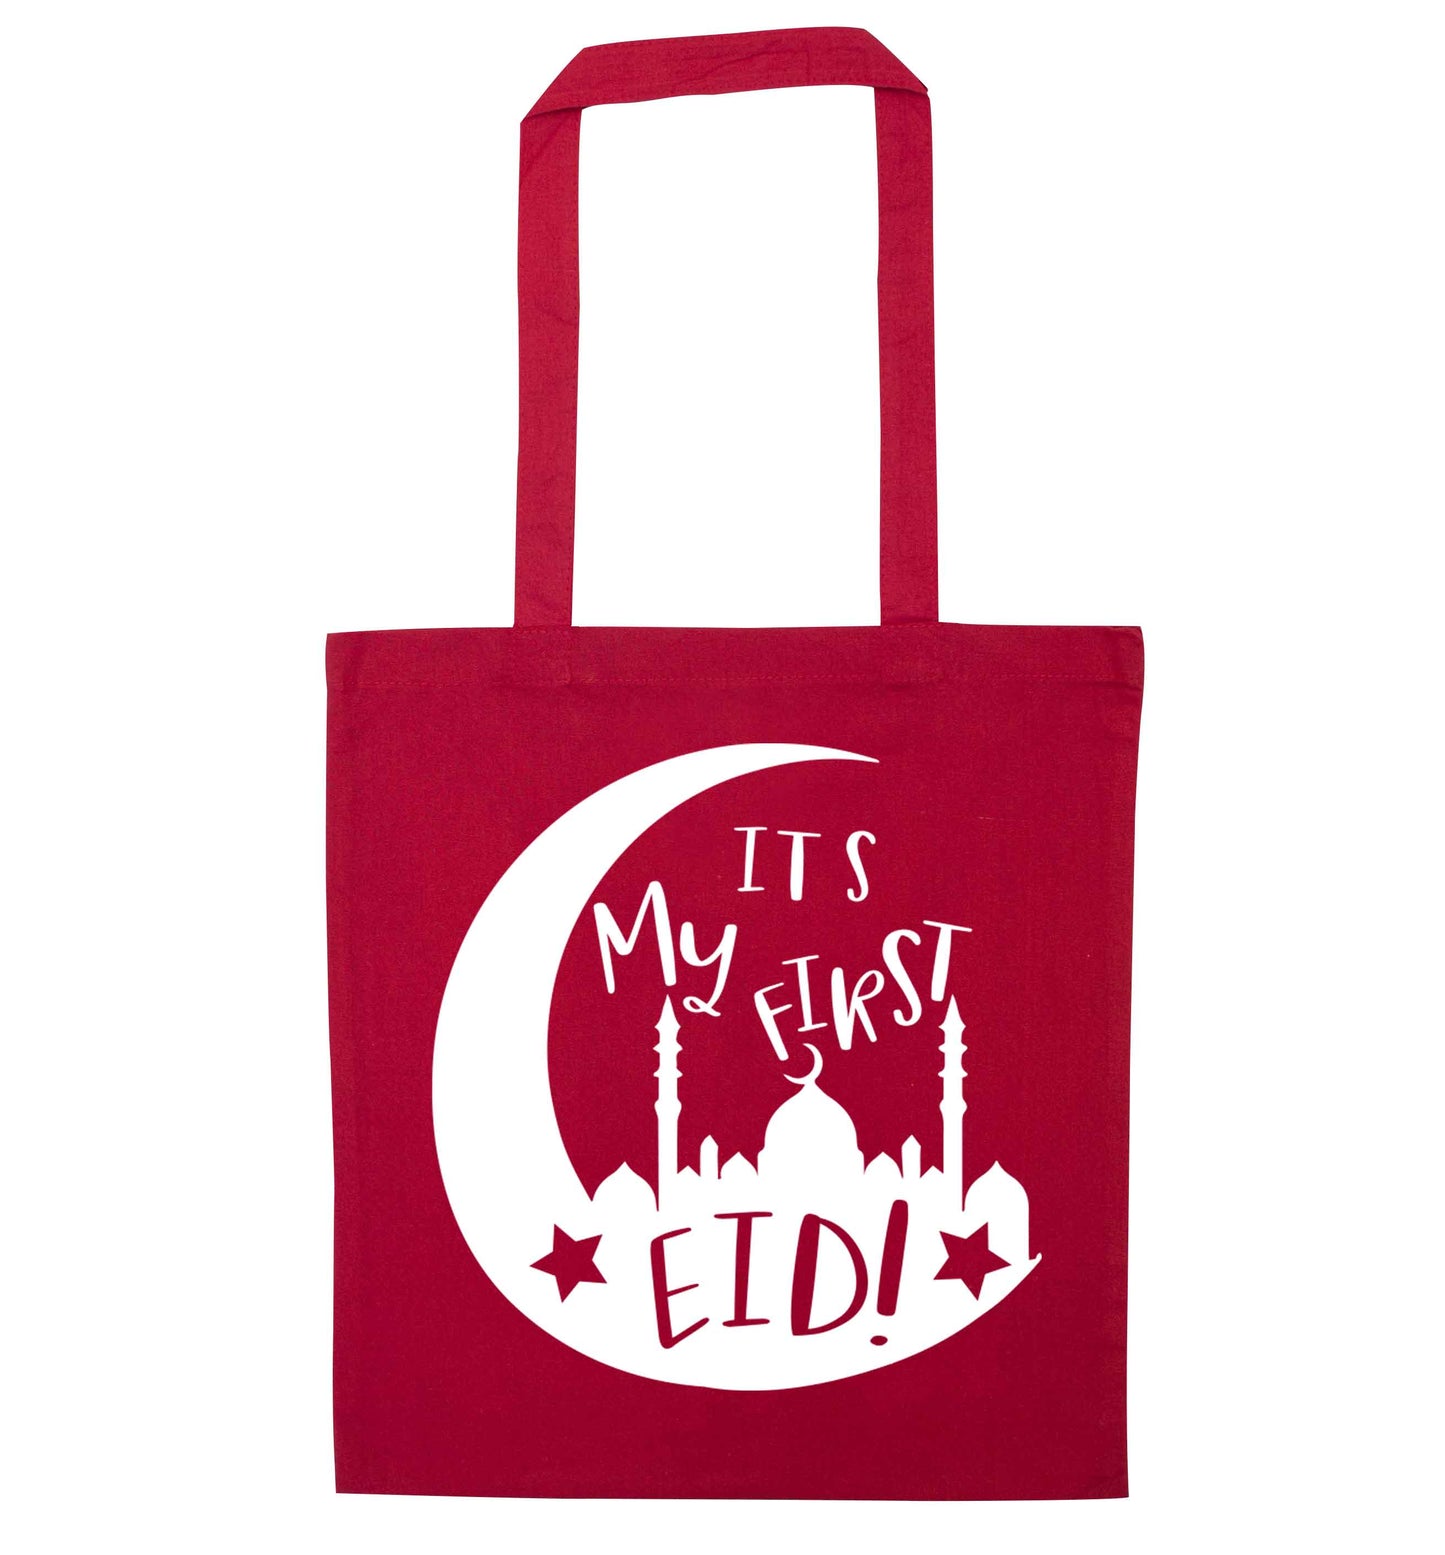 It's my first Eid moon red tote bag